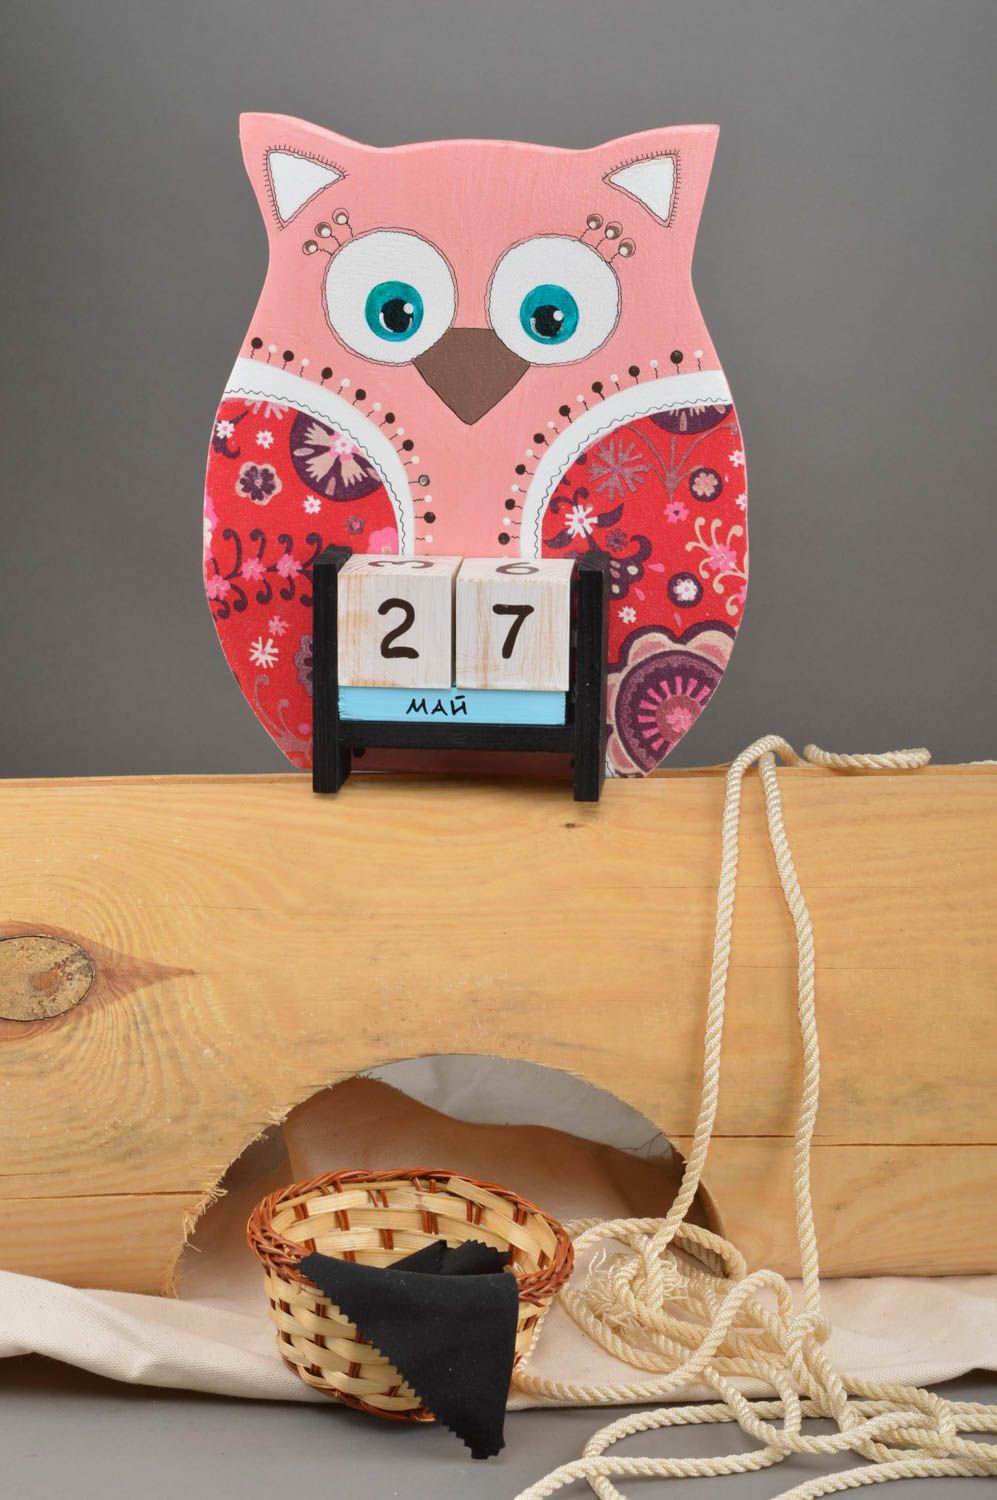 Bright pink calendar unusual table decor beautiful stylish toys for kids photo 1